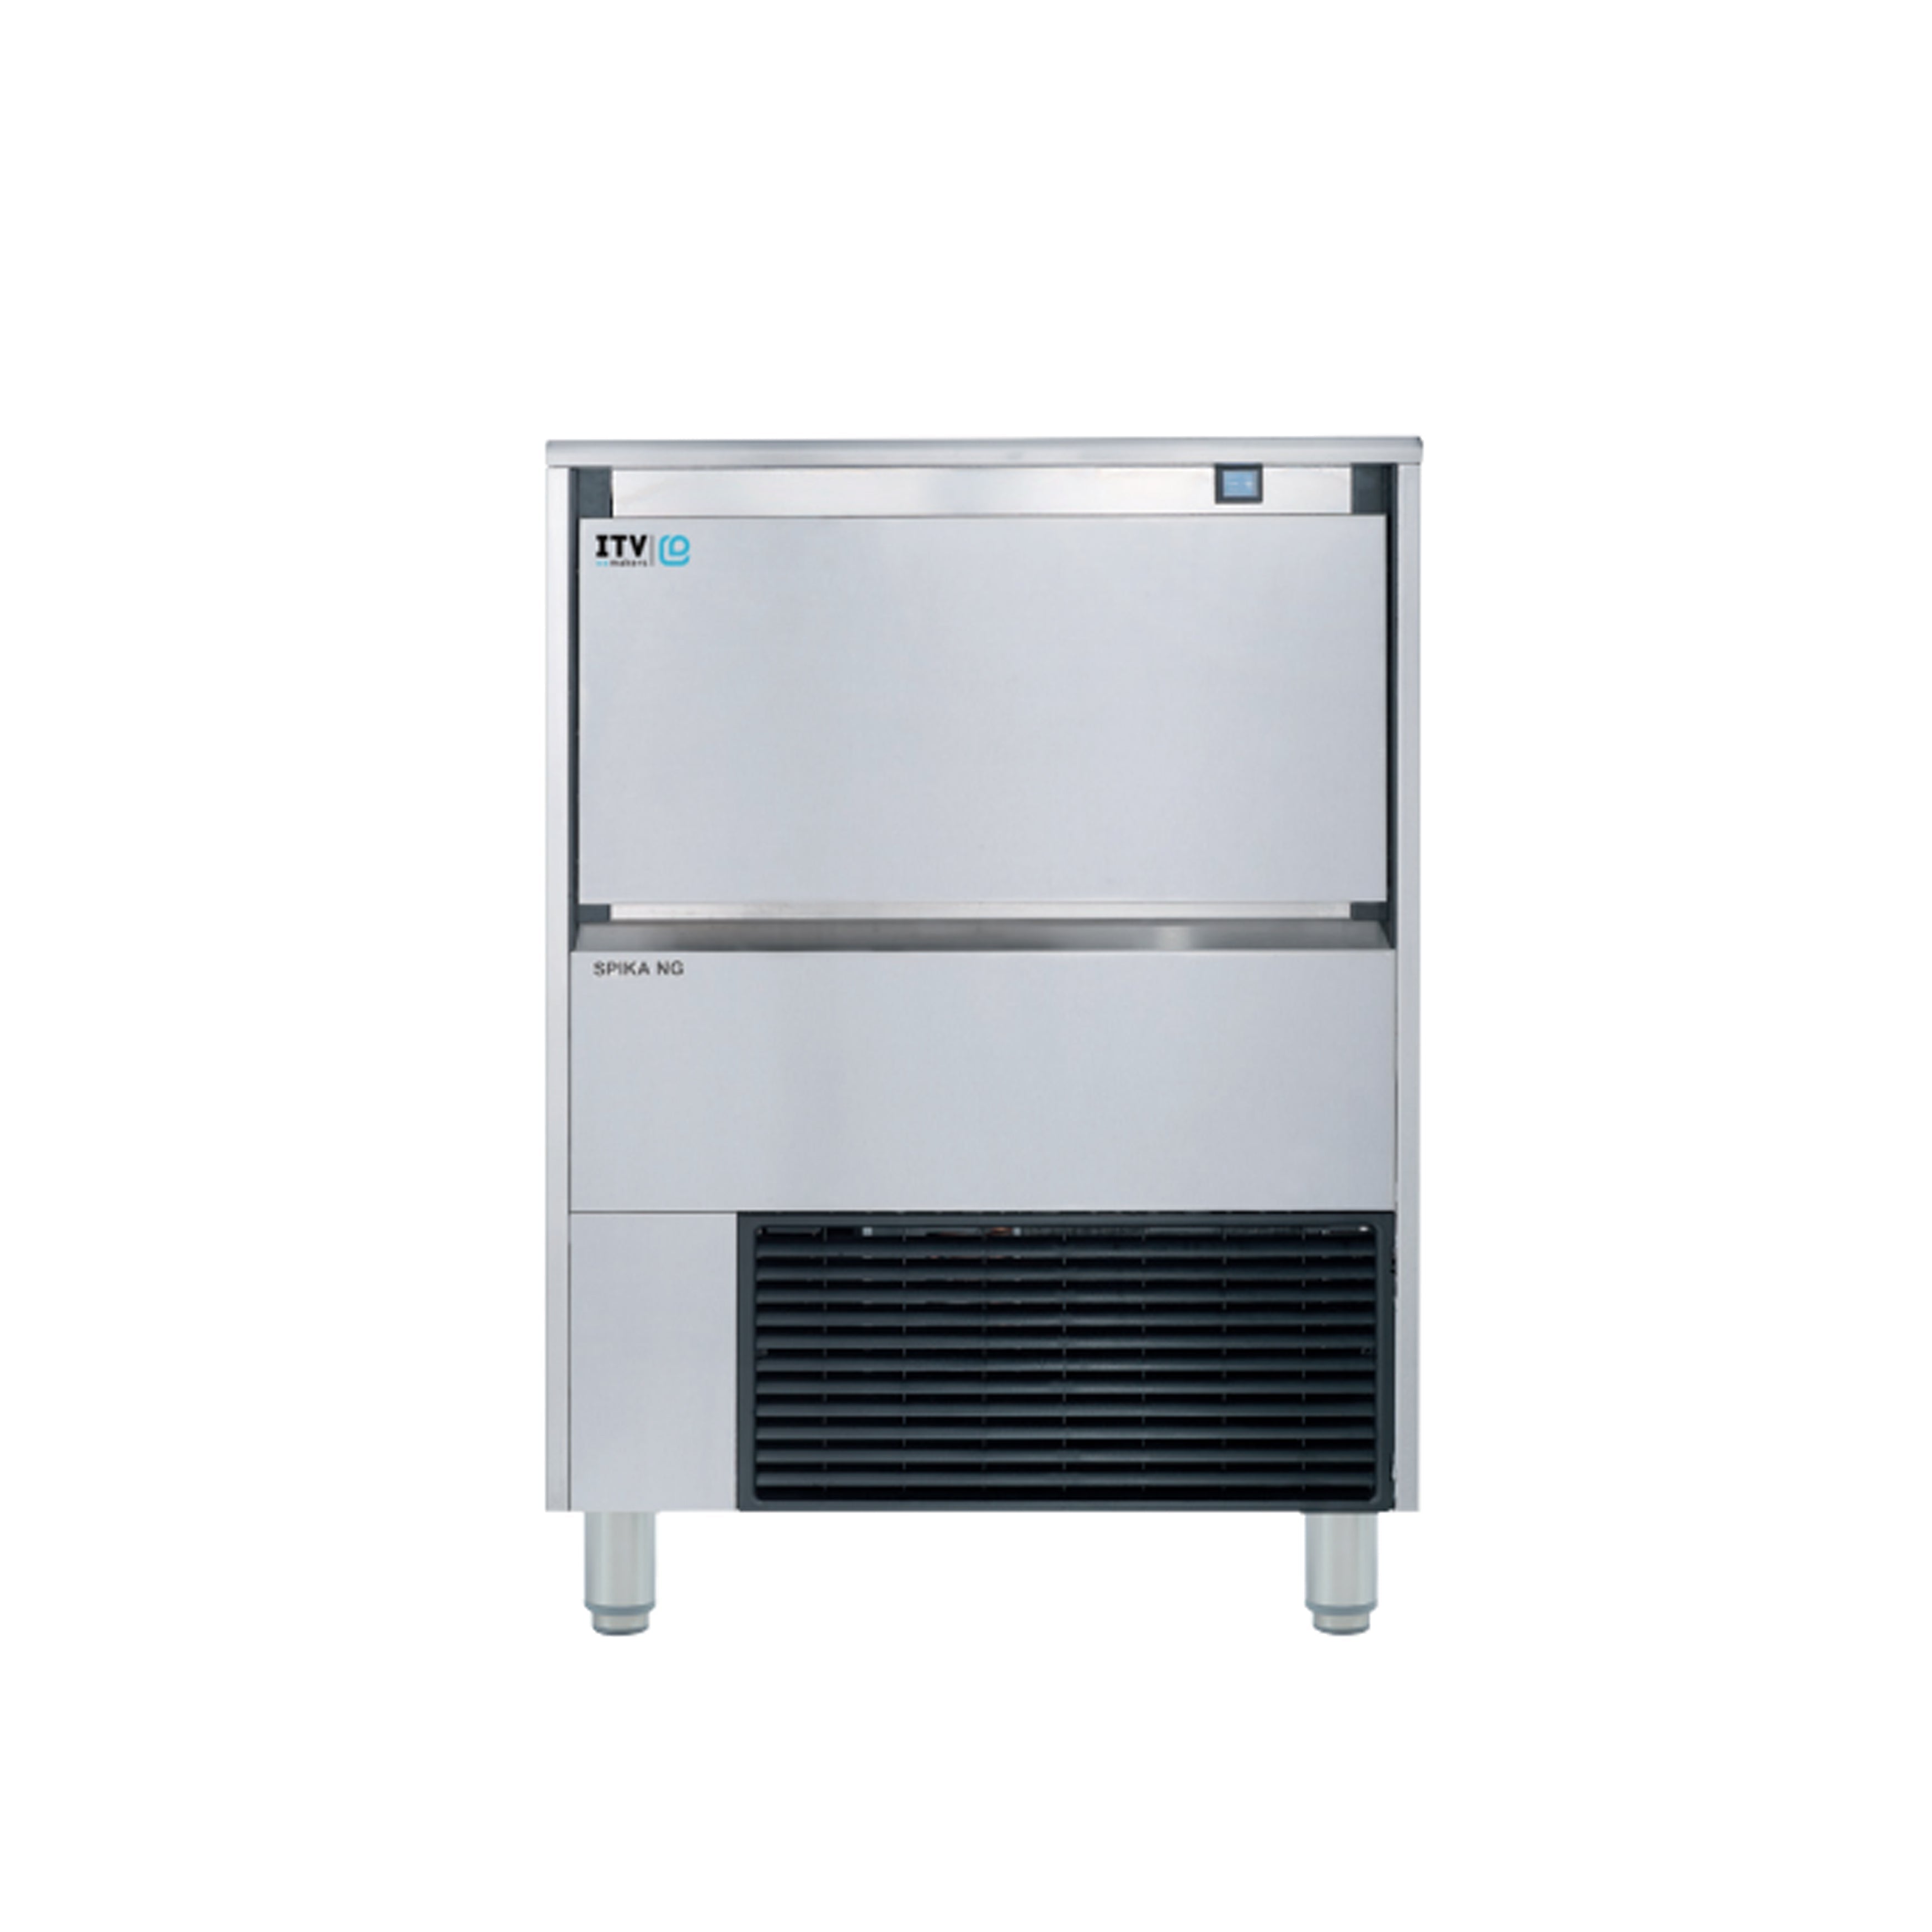 ITV - SPIKA NG 360A, Commercial Spika Cubers under-counter Ice Maker Self-Contained Ice Cube Machine 342lbs